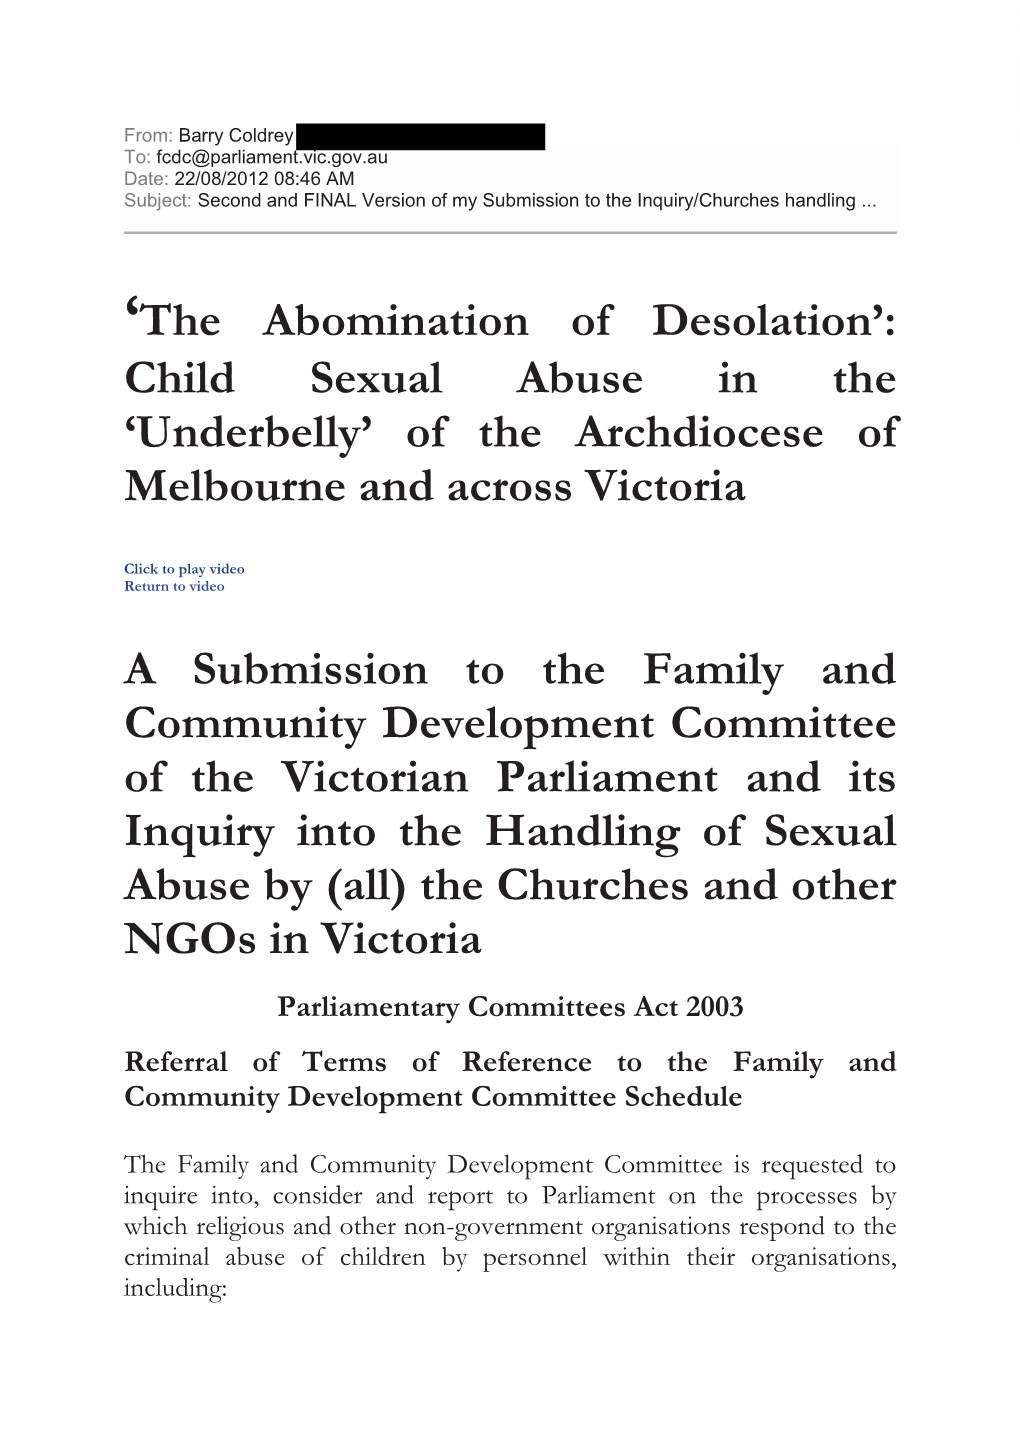 Child Sexual Abuse in the ‘Underbelly’ of the Archdiocese of Melbourne and Across Victoria